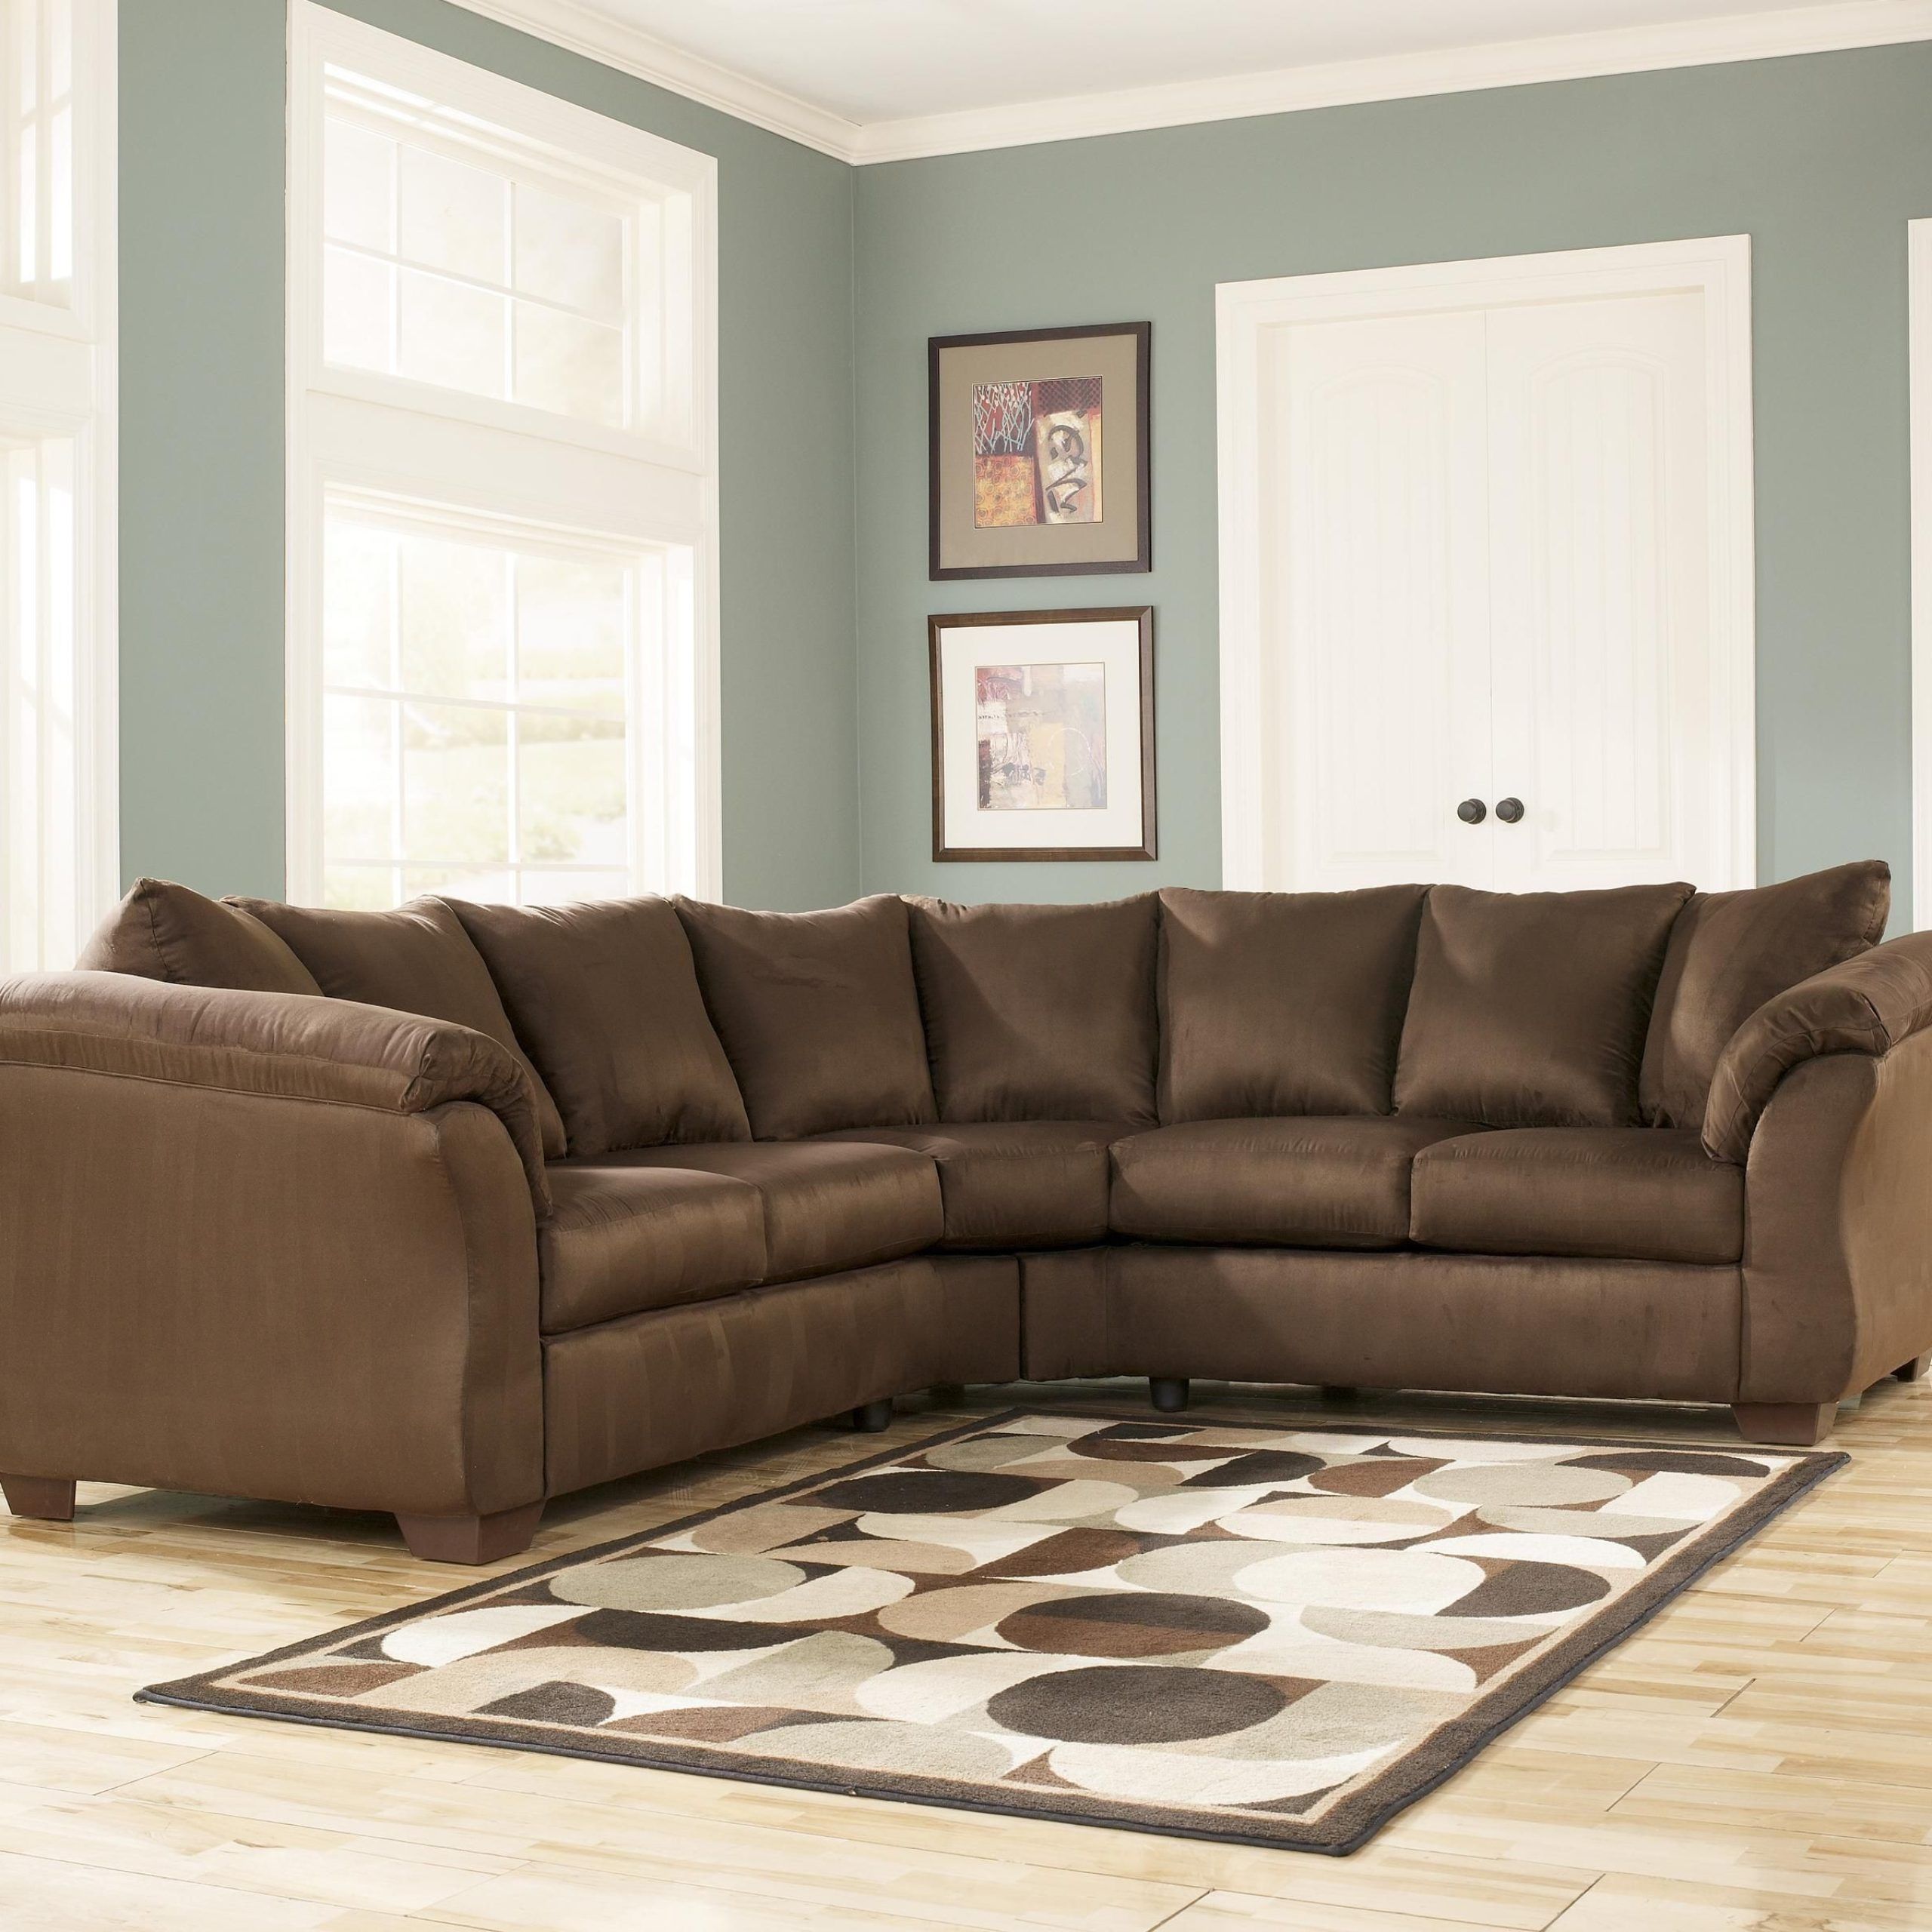 15 Collection Of Ashley Curved Sectional | Sofa Ideas Within 130" Curved Sectionals (View 3 of 20)